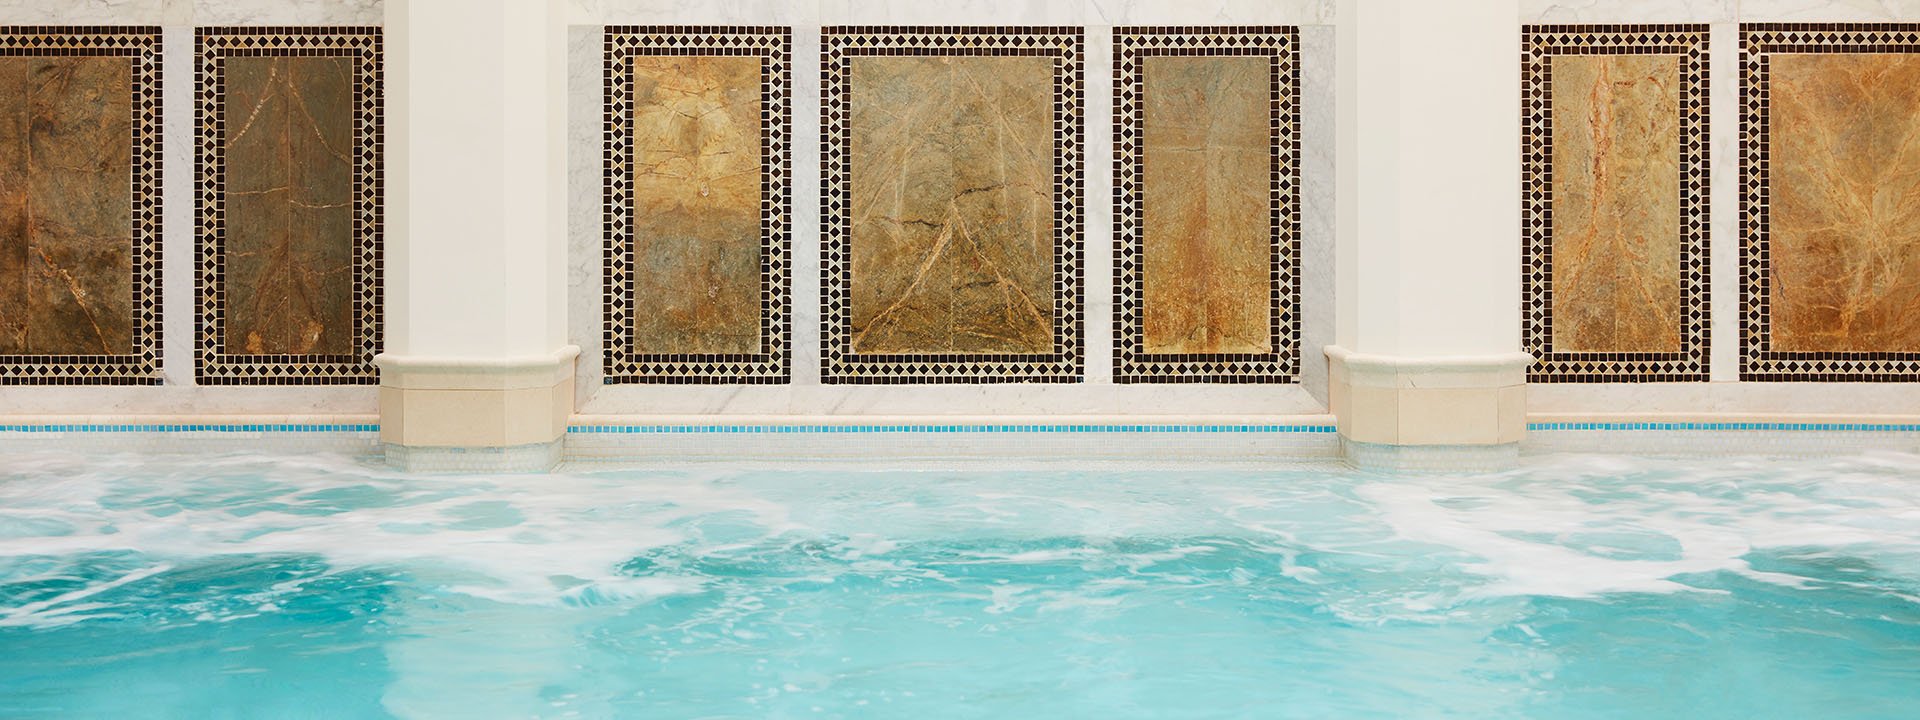 A large, mineral spa pool with mosaic walls